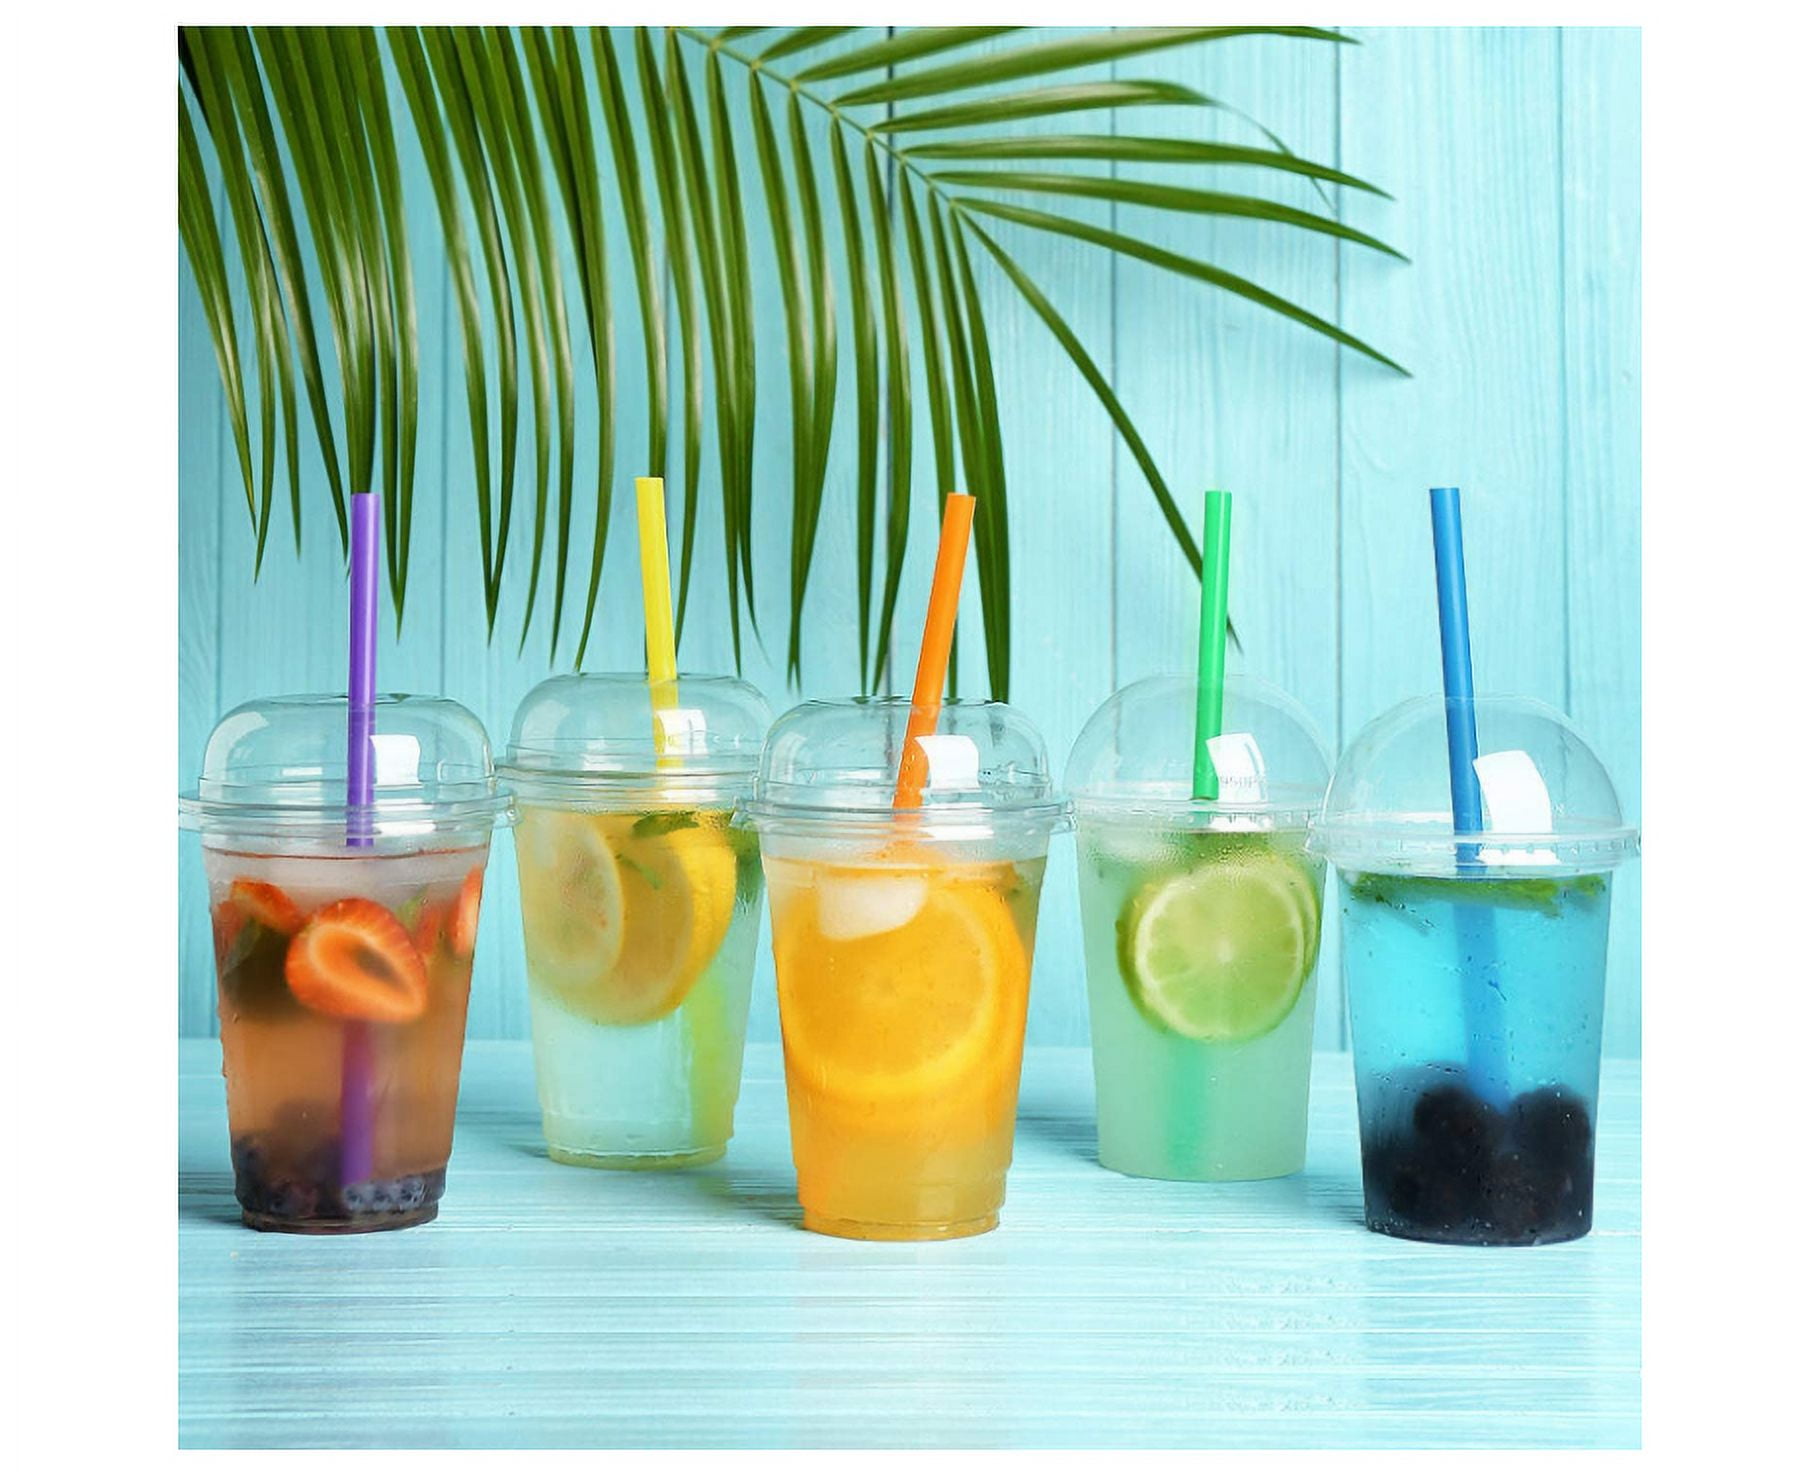 5PCS Stainless Steel Boba Straws, Reusable Big Fat Smoothies Straws Wide  Straw for Bubble Tea, Juice, Thick Milkshakes 